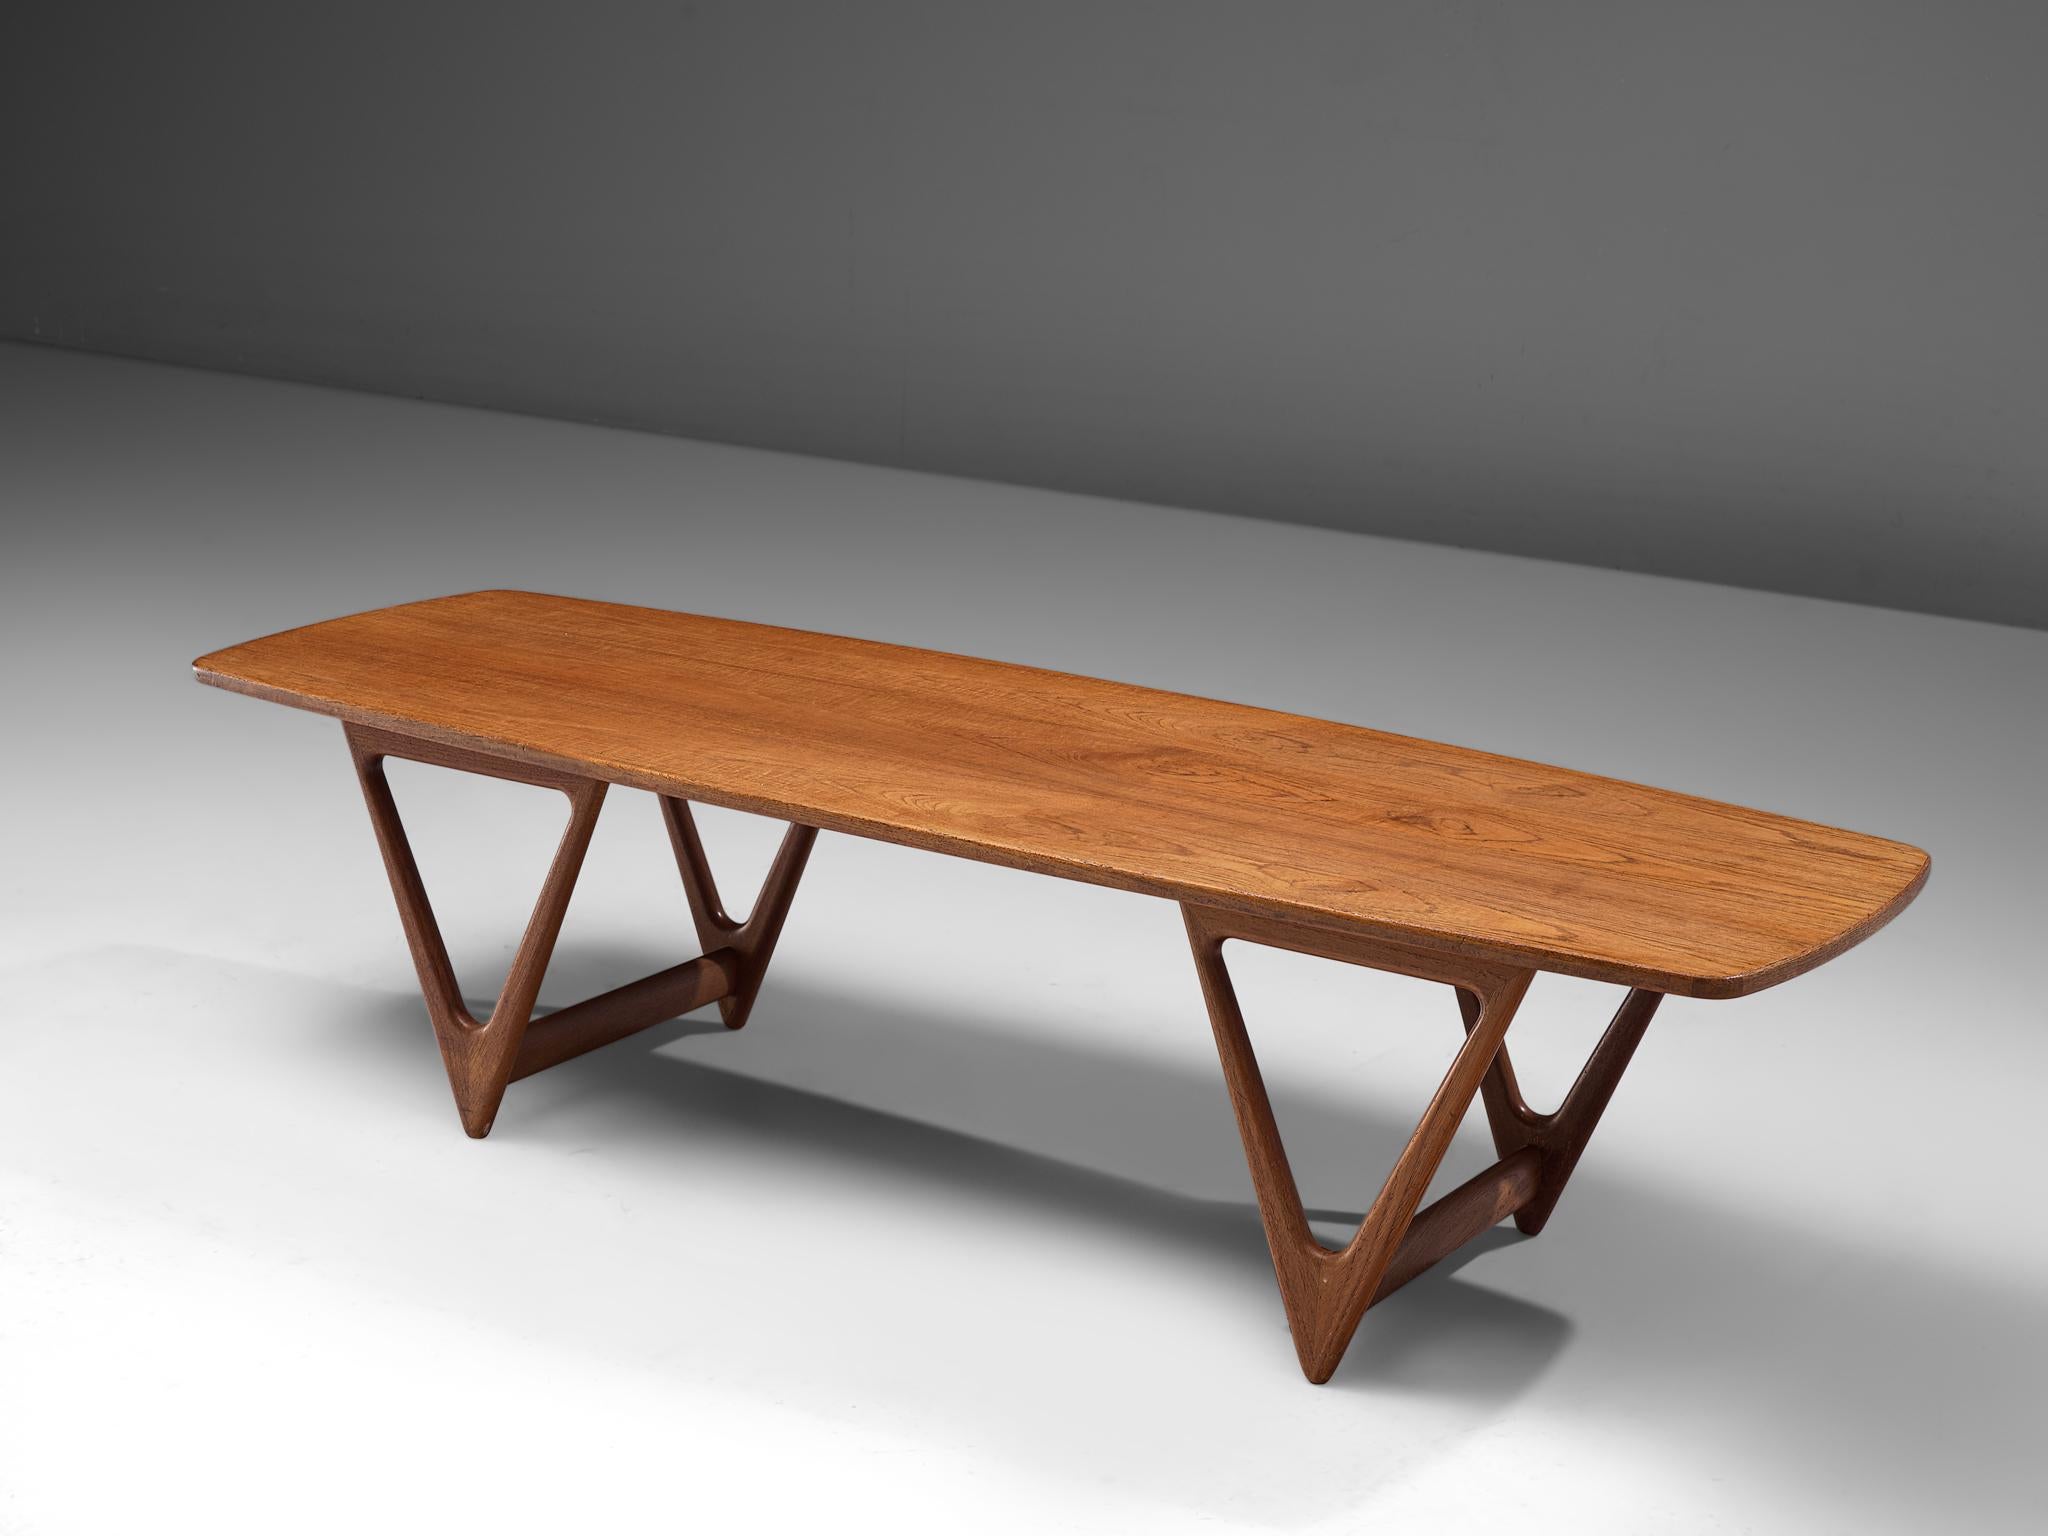 Kurt Østervig, 'Surfboard' coffee table, teak, Denmark, 1950s.

Boat-shaped coffee table with a long tabletop with sweeping teak veneer and beautifully sculpted V-shaped legs. A design by the Dane Kurt Østervig from the 1950s. The low table